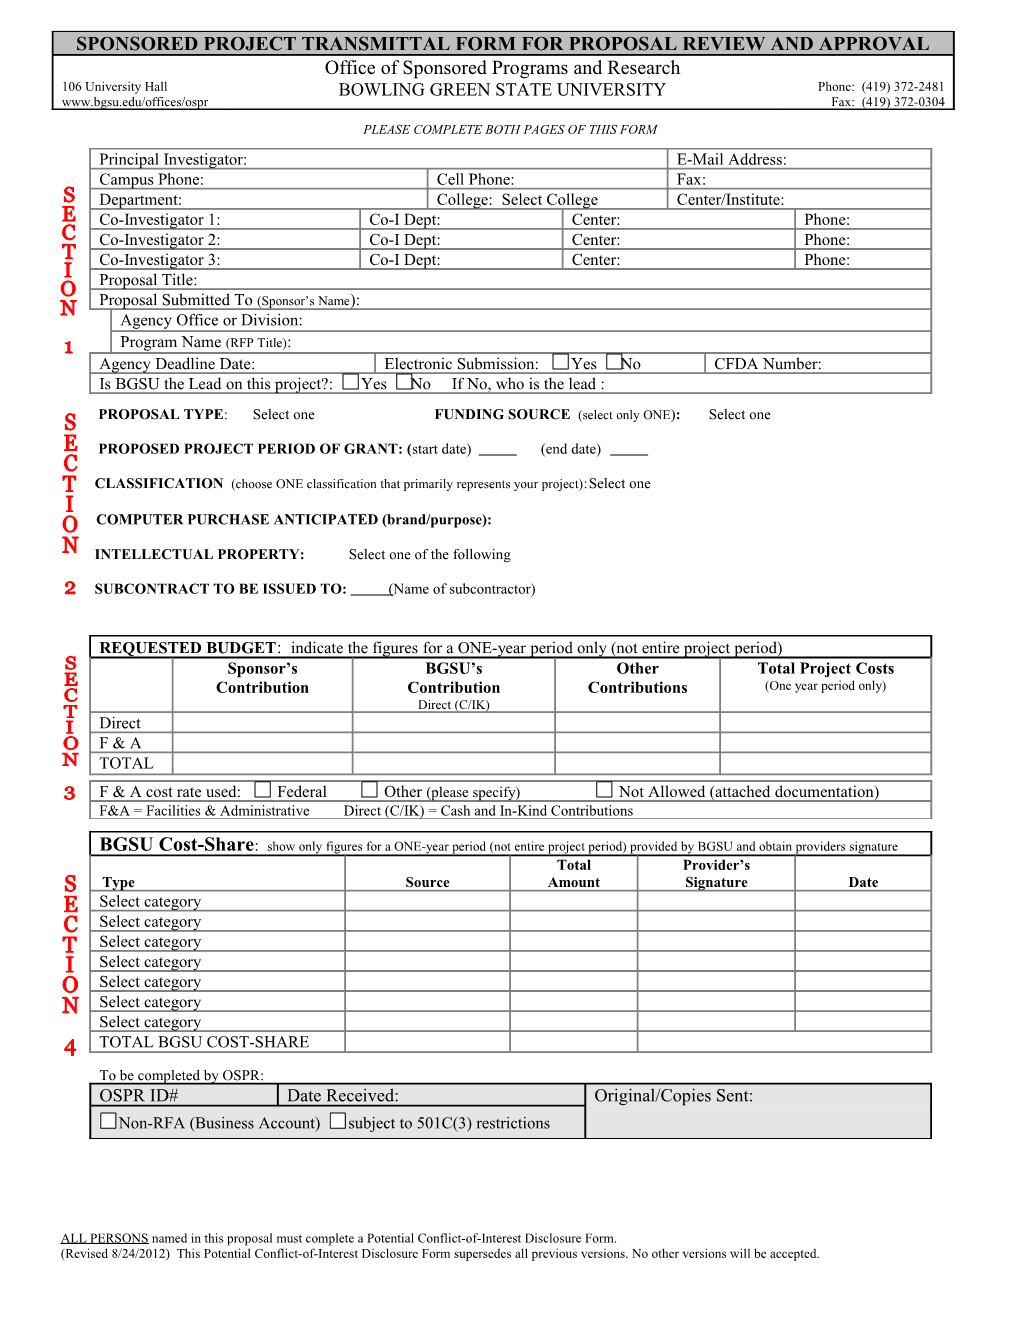 Please Complete Both Pages of This Form